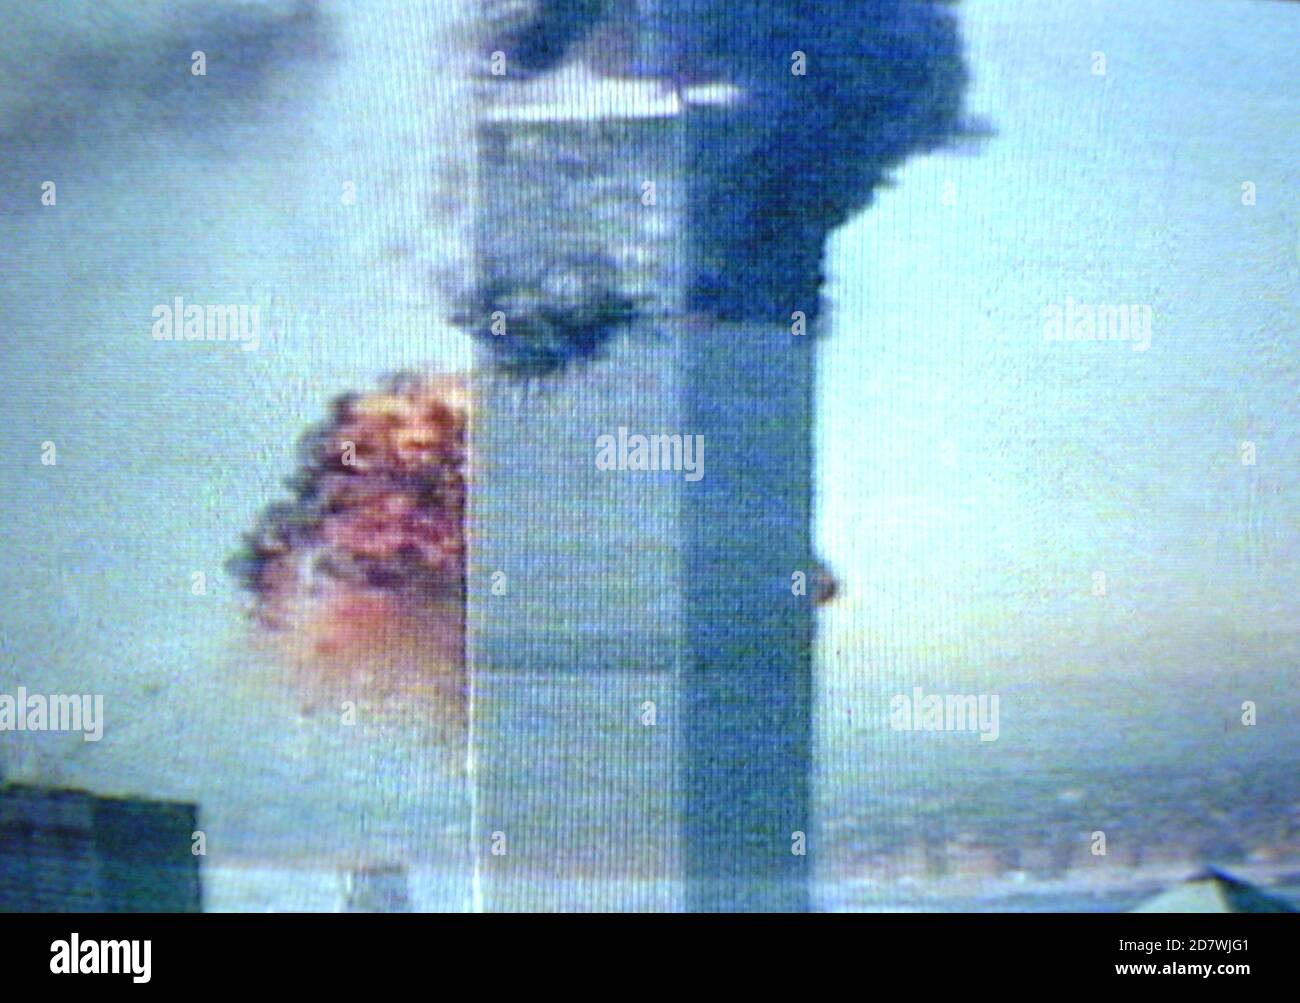 AJAXNETPHOTO. 11TH SEPTEMBER, 2001. MANHATTAN, NEW YORK CITY, USA - 9/11 MOMENT OF IMPACT. - TV NEWS LIVE BROADCAST SCREEN GRAB OF THE MOMENT UNITED AIRLINES FLIGHT 175 SLAMMED INTO THE SOUTH TOWER OF THE WORLD TRADE CENTRE AS SEEN BY MILLIONS OF T.V. WATCHERS OF THE WORST TERRORIST ATTACK ON AMERICAN SOIL. WTC NORTH TOWER IS ALREADY BURNING HIGHER UP FROM THE EARLIER IMPACT OF AMERICAN AIRLINES FLIGHT 11. BOTH TOWERS WERE DESTROYED IN THE ATTACK. PHOTO:JONATHAN EASTLAND/AJAX REF:D011109 15 Stock Photo